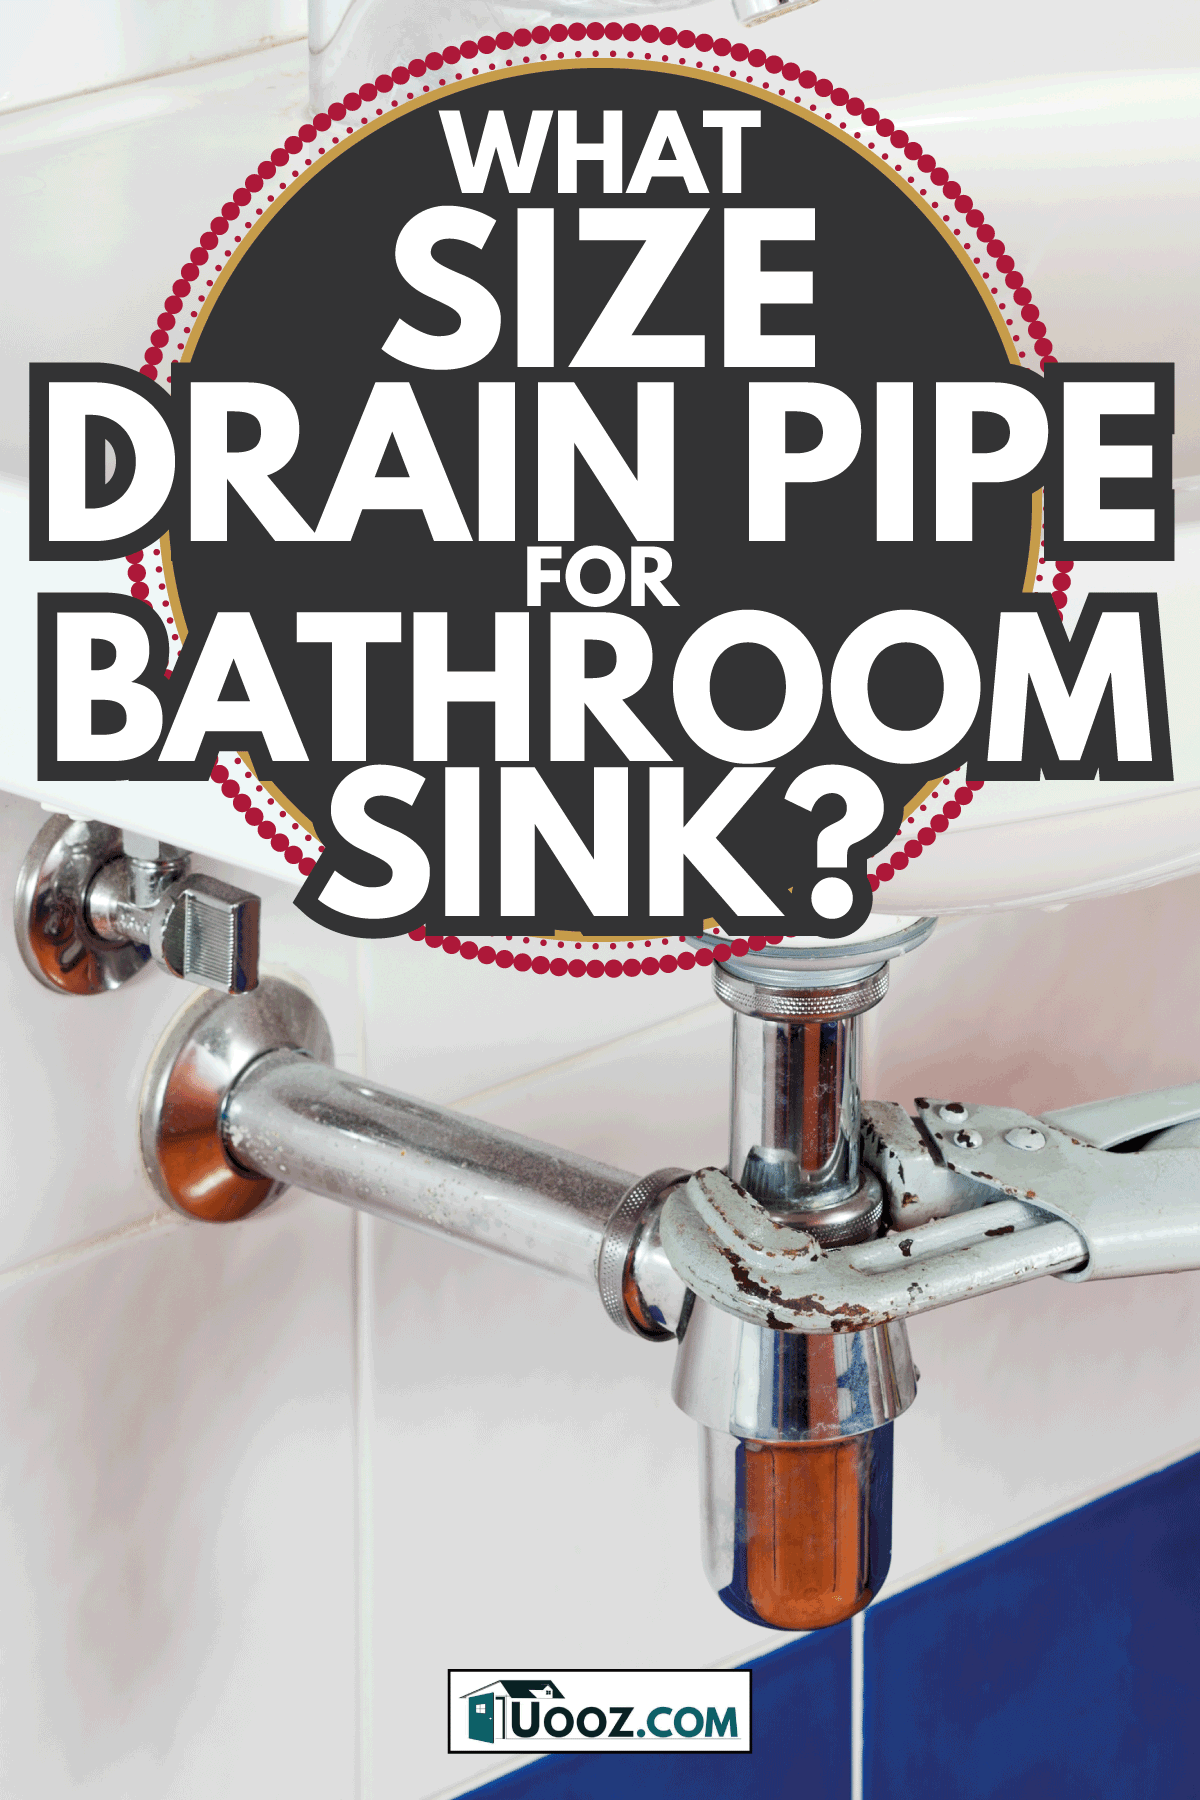 tightening bathroom sink drain pipe. What Size Drain Pipe For Bathroom Sink